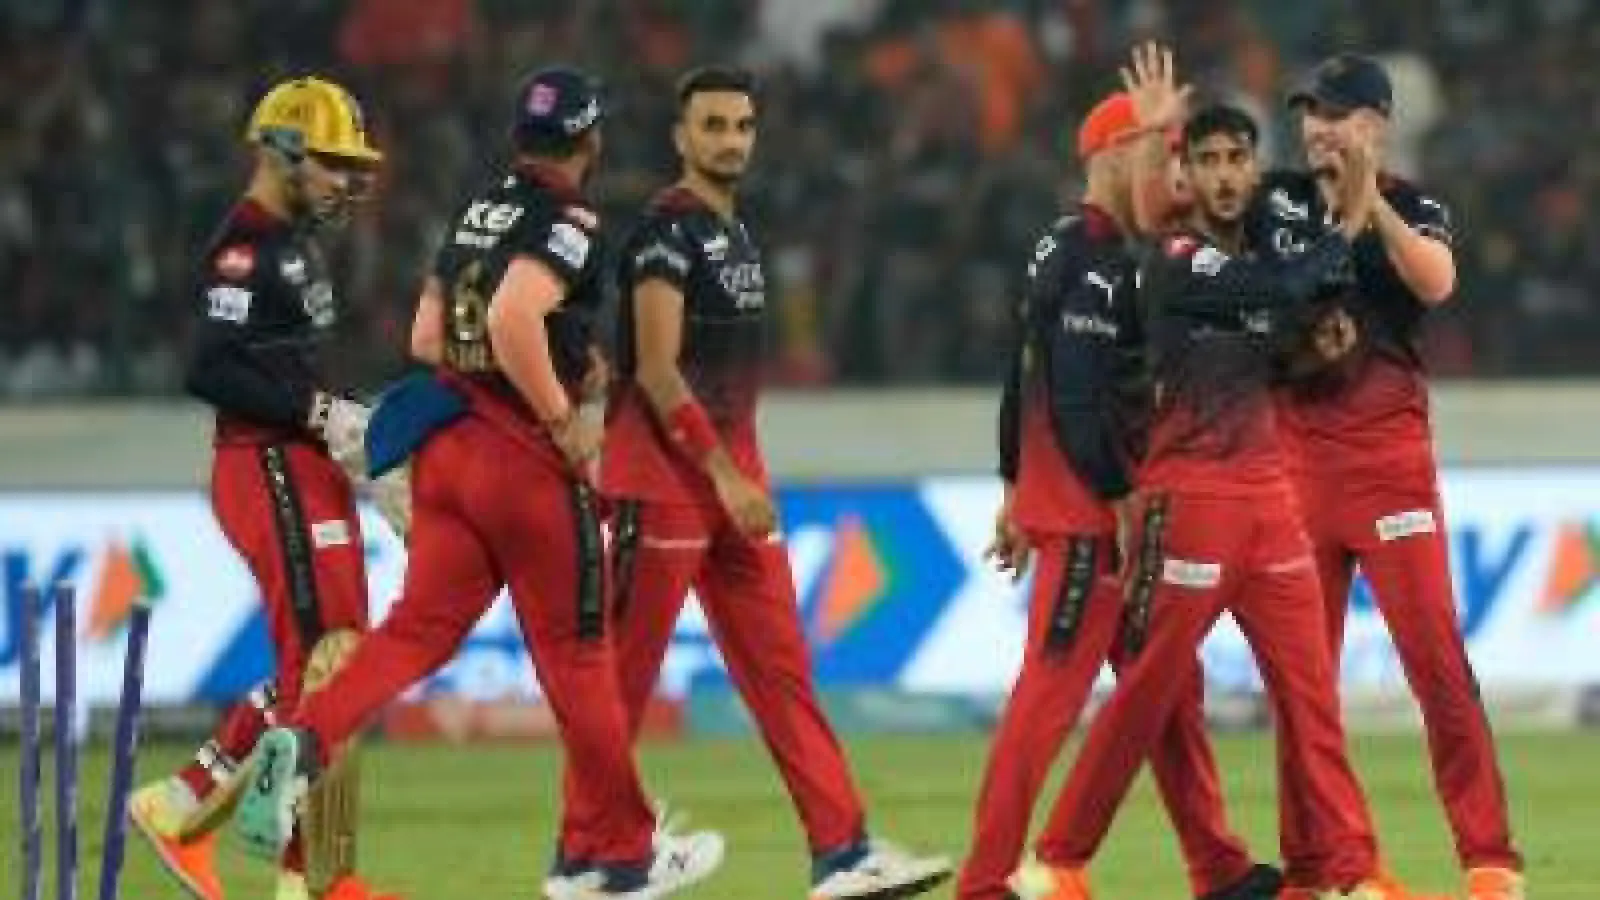 Royal Challengers Bangalore won the toss and chose bowling, this player made his debut for Gujarat